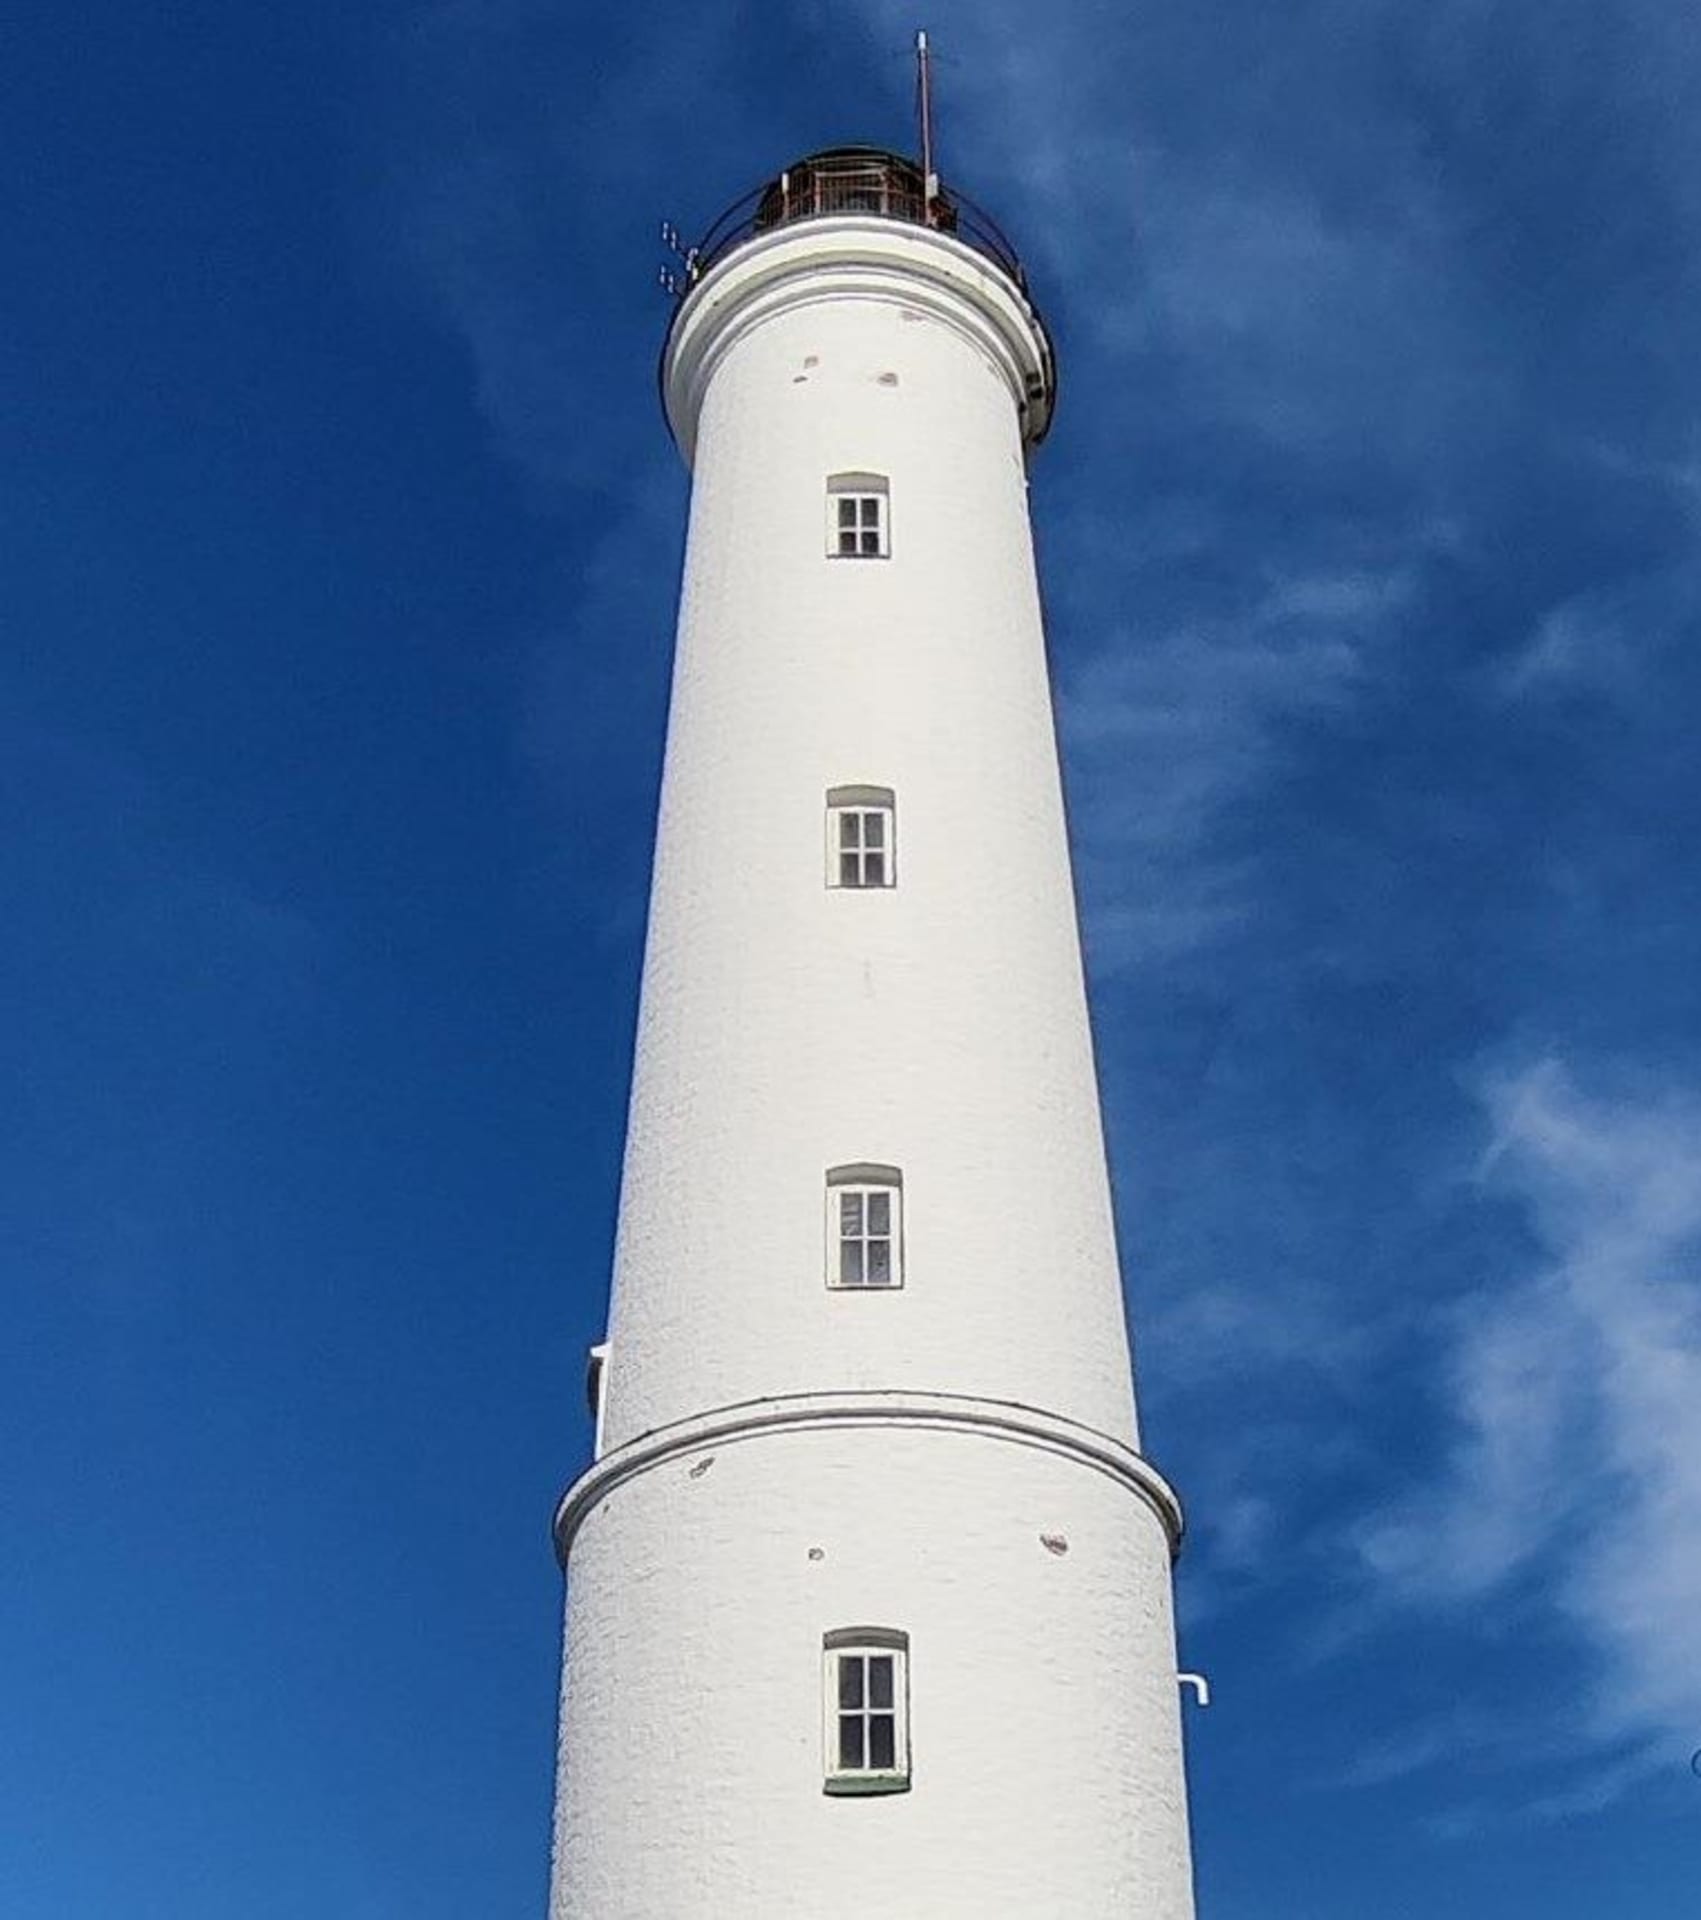 The white lighthouse in Hailuoto Marjaniemi against the blue sky.